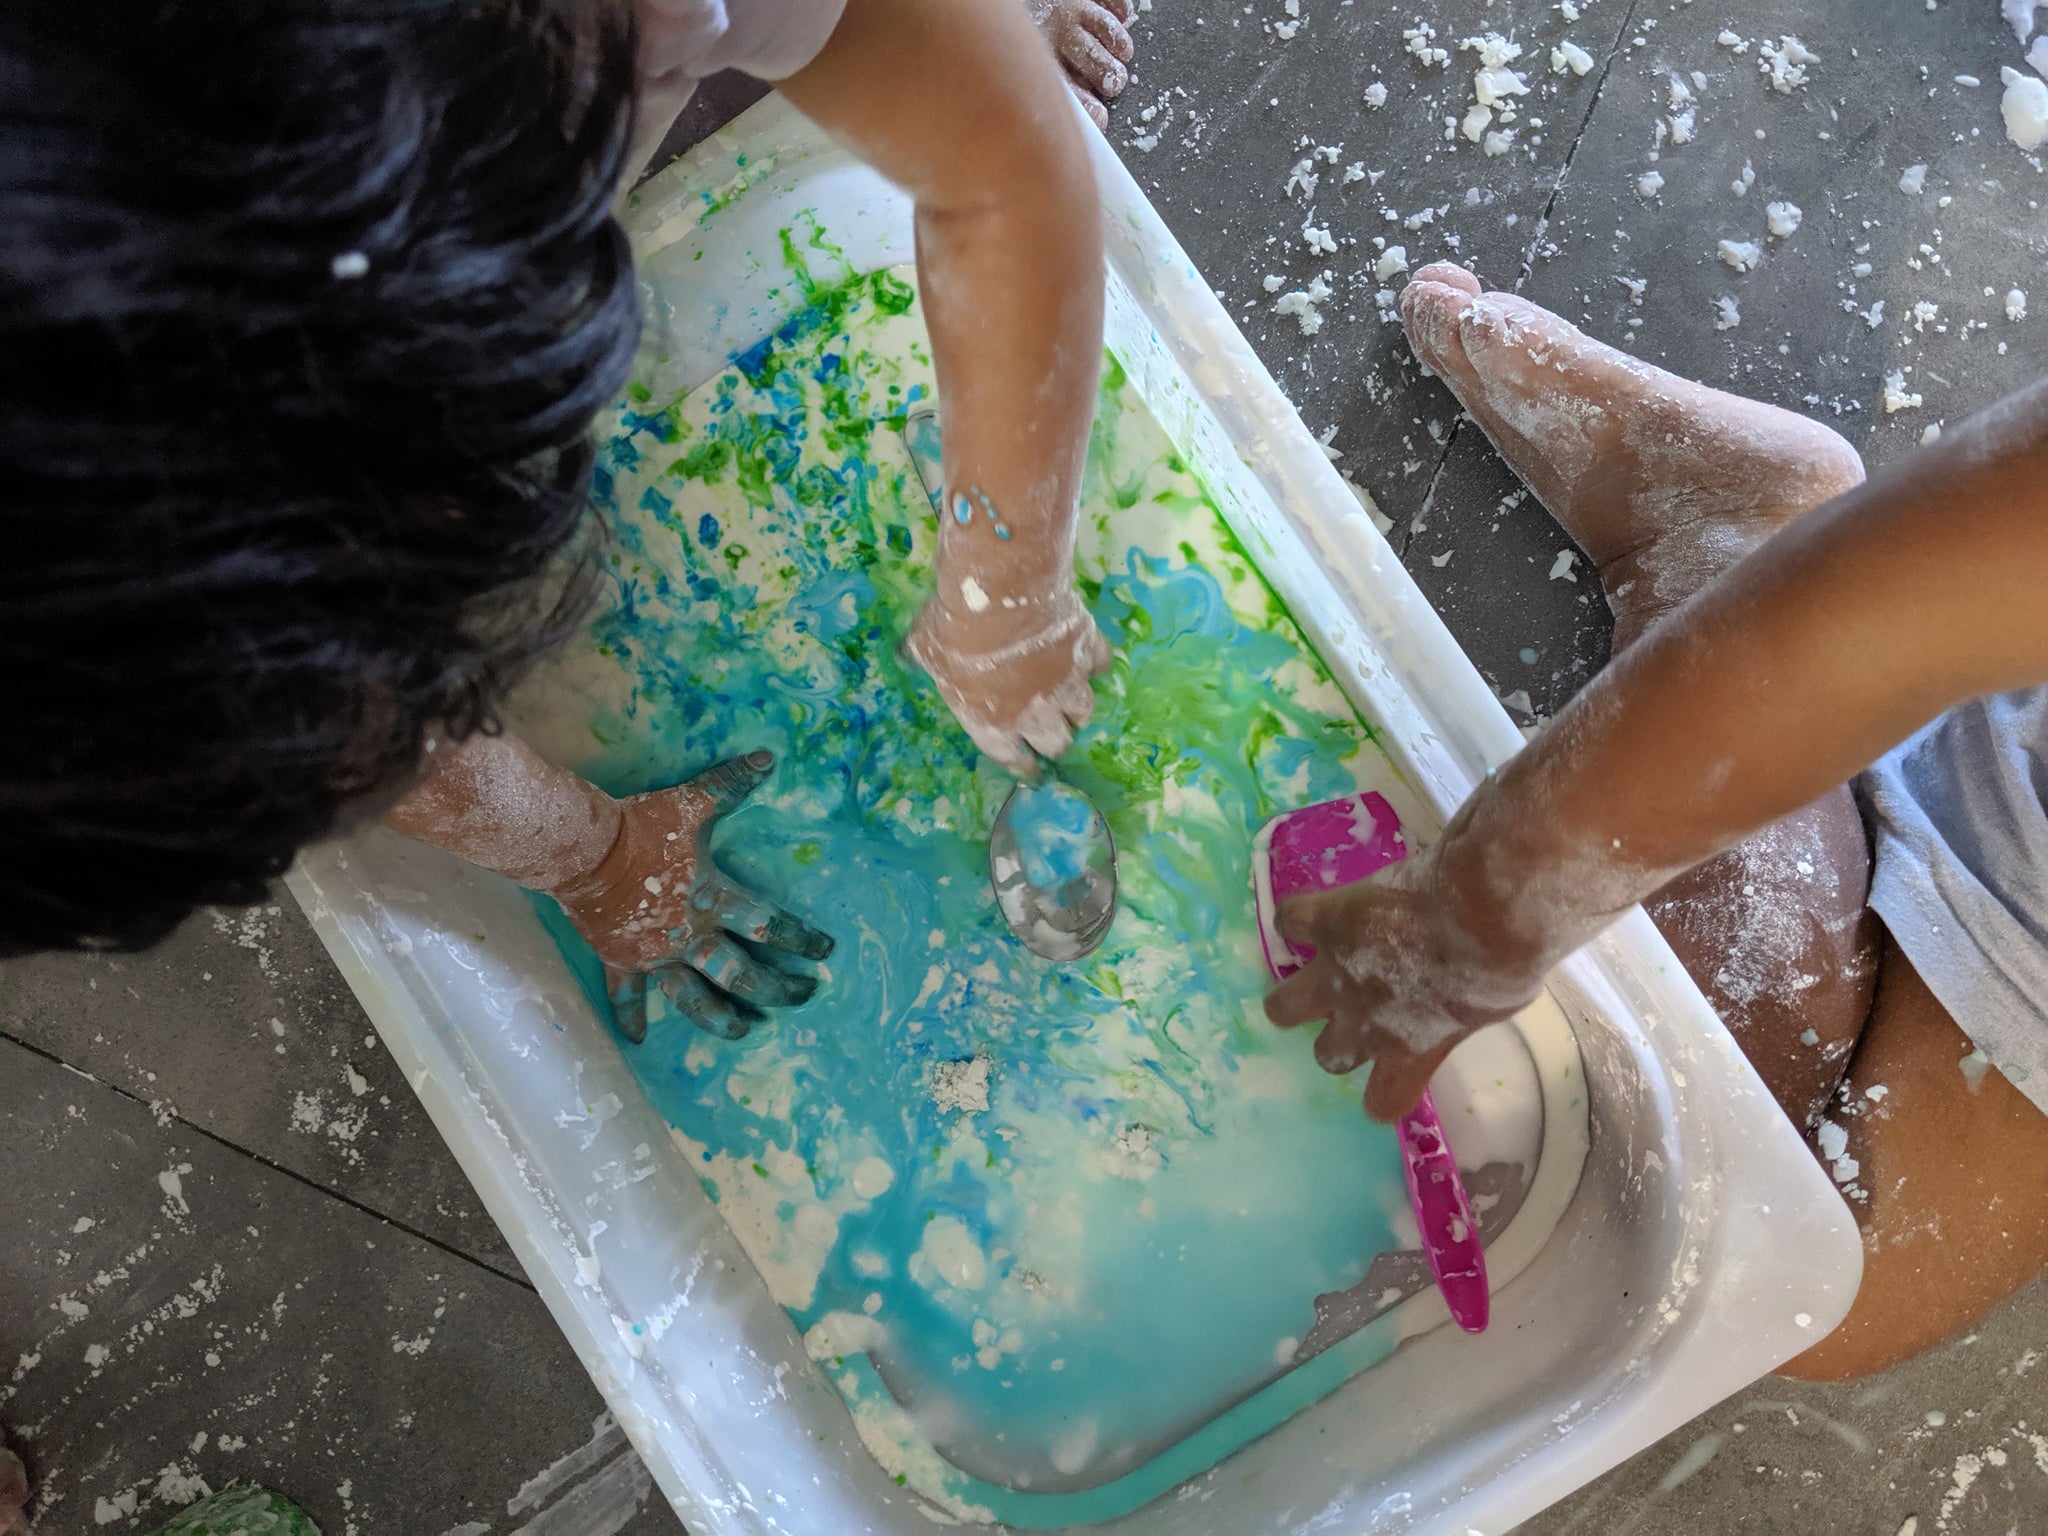 #selbsseries | Home based sensory play for toddlers